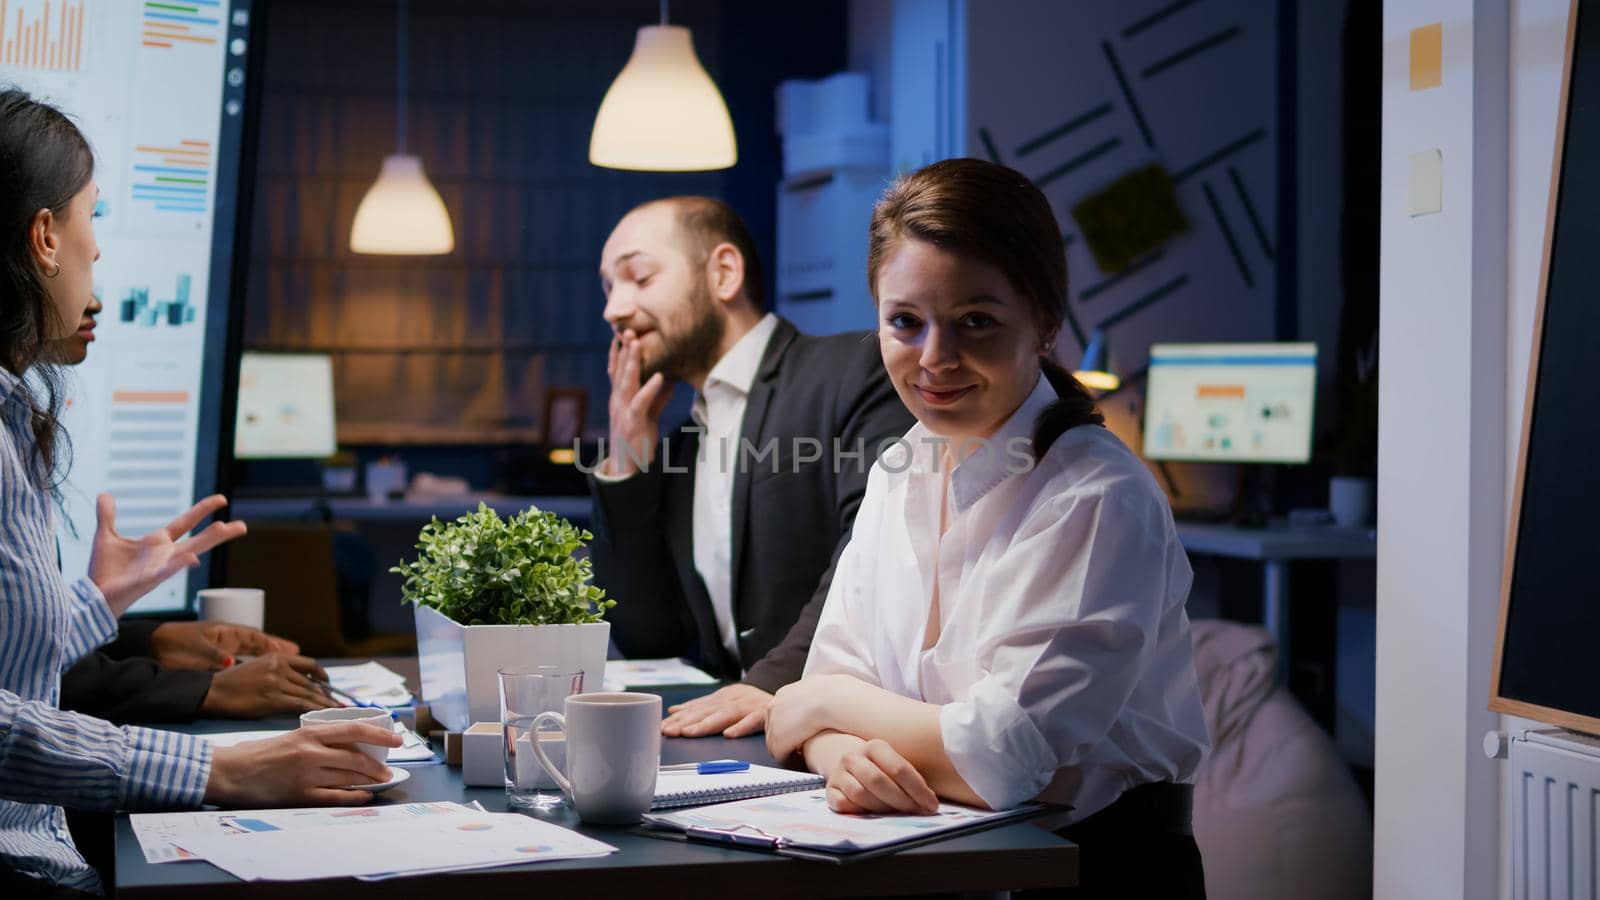 Portrait of workaholic businesswoman looking into camera while working in company office meeting room late at night. Diverse teamwork overworked discussing investment strategy expertise in evening